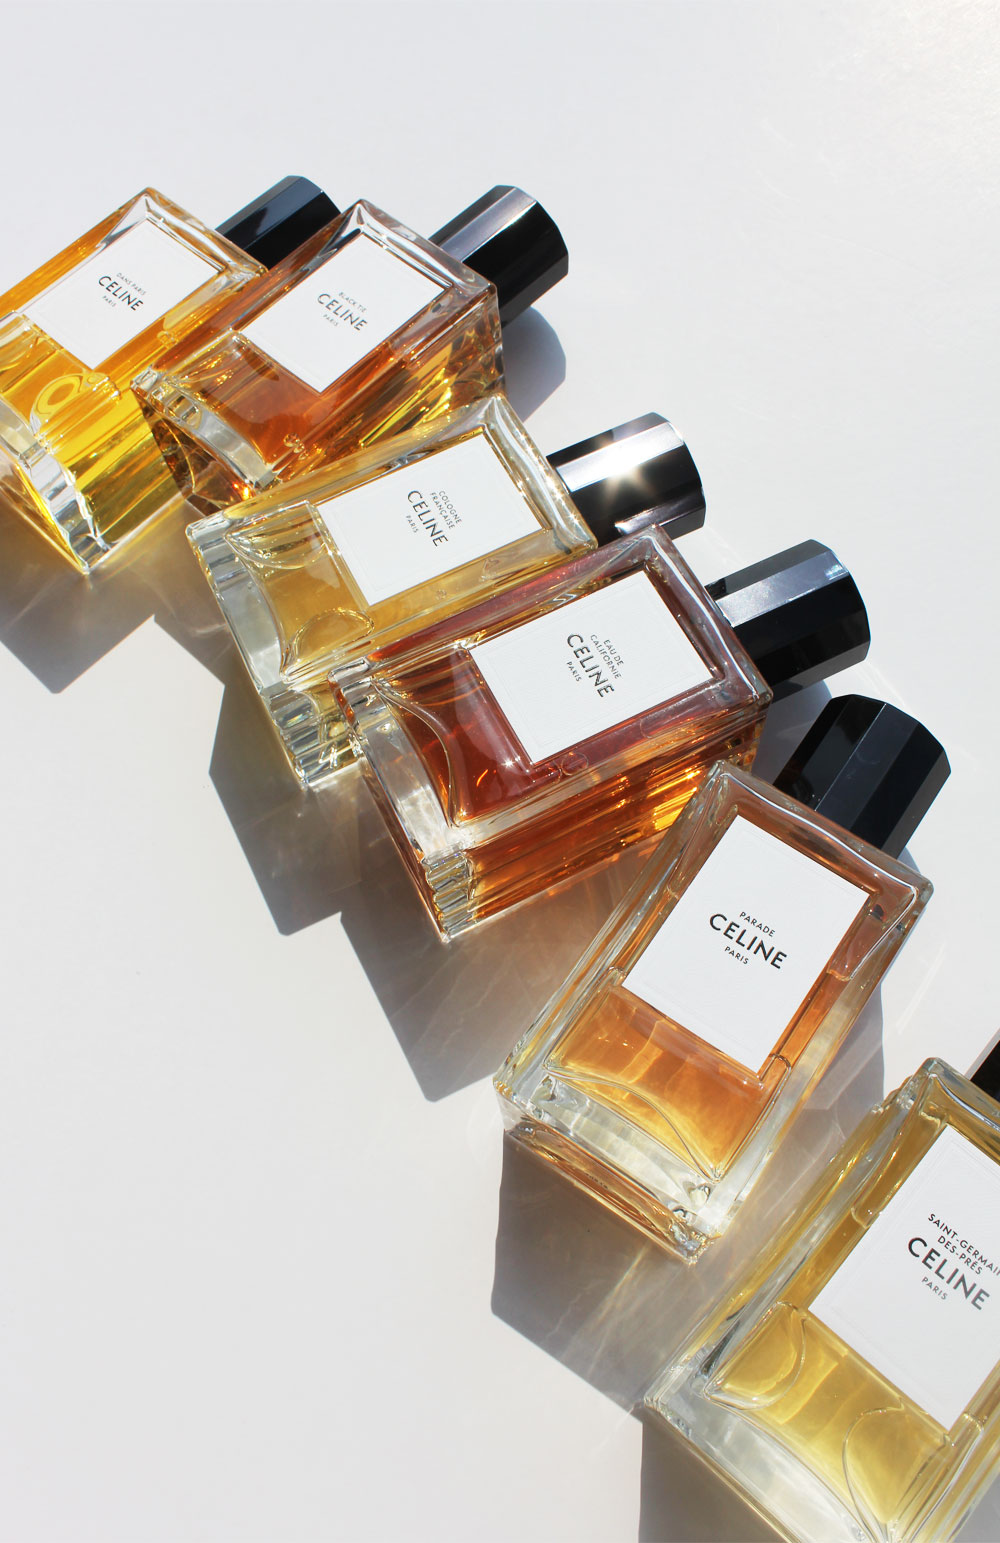 CELINE fragrance review: A Look at CELINE's Debut Collection